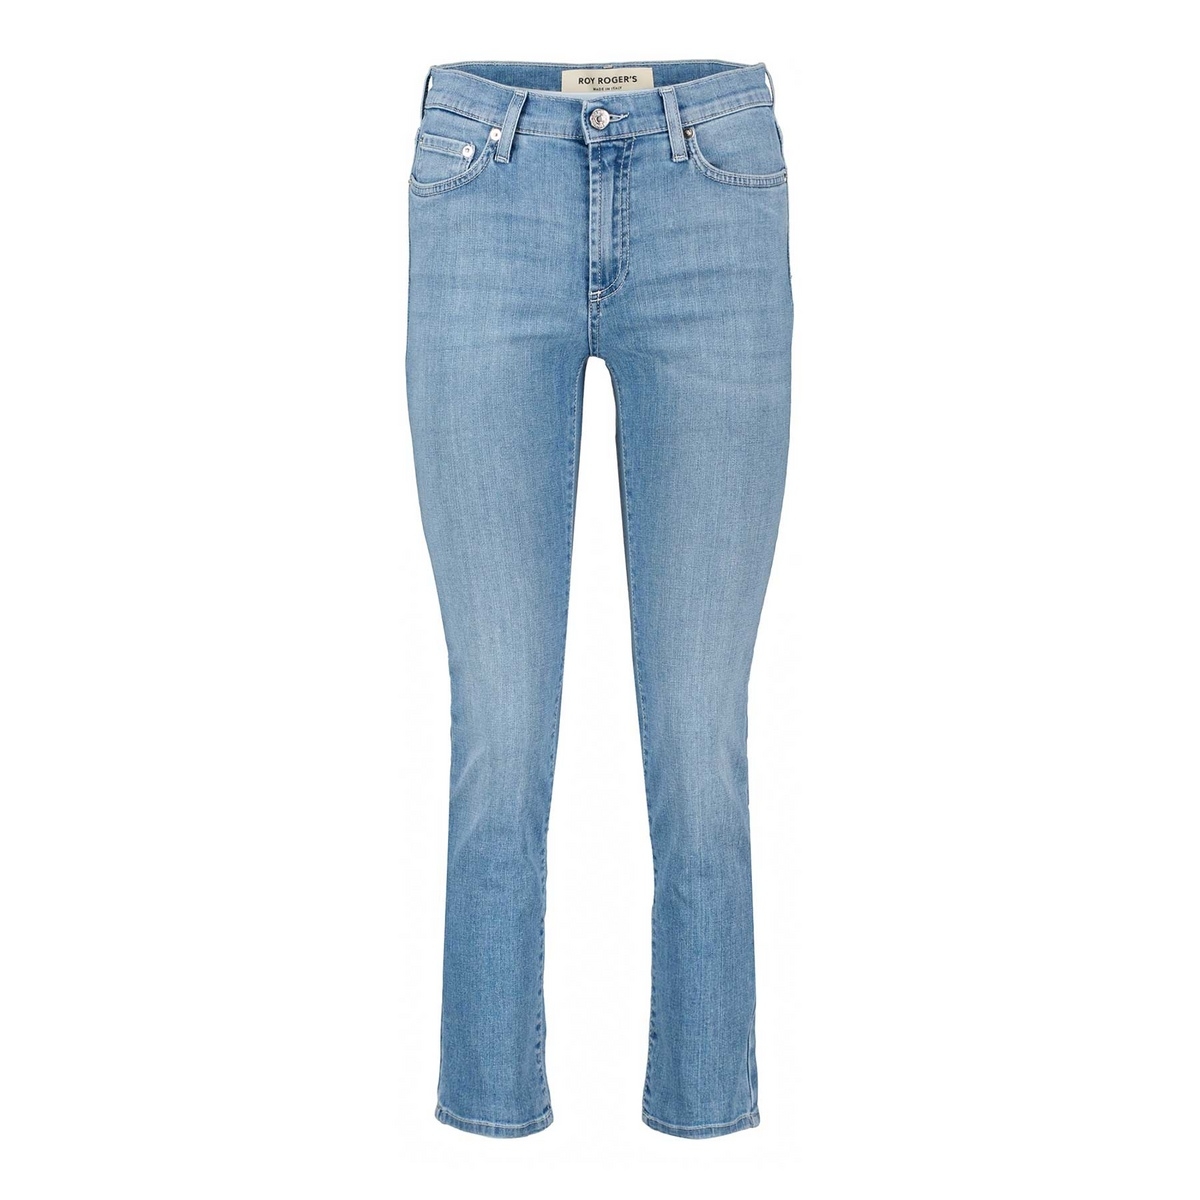 roy rogers jeans straight muse flo donna uomo